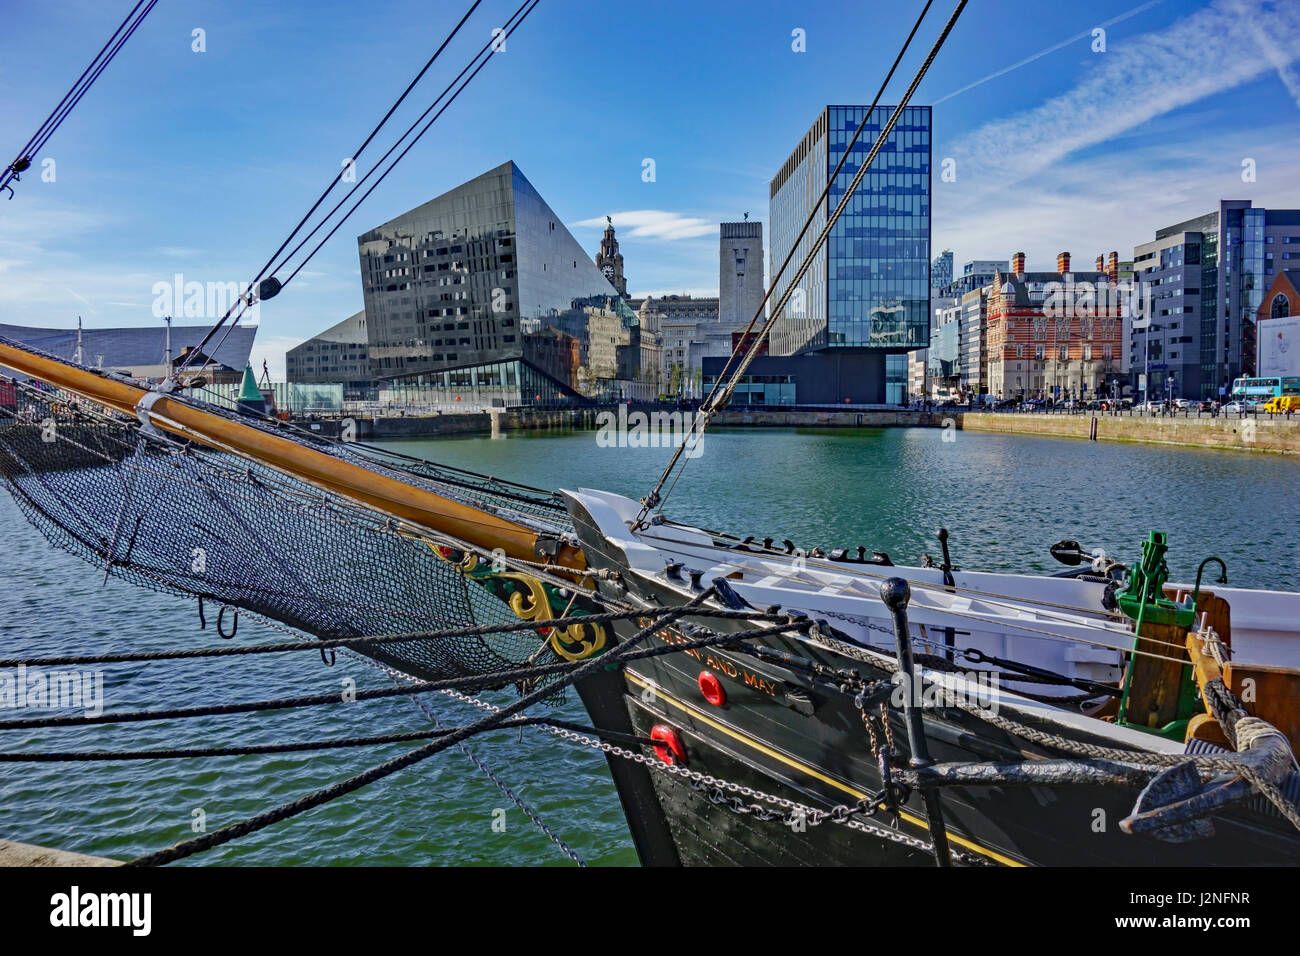 Sailing ship in Canning Dock, Liverpool with view of modern buildings Stock Photo